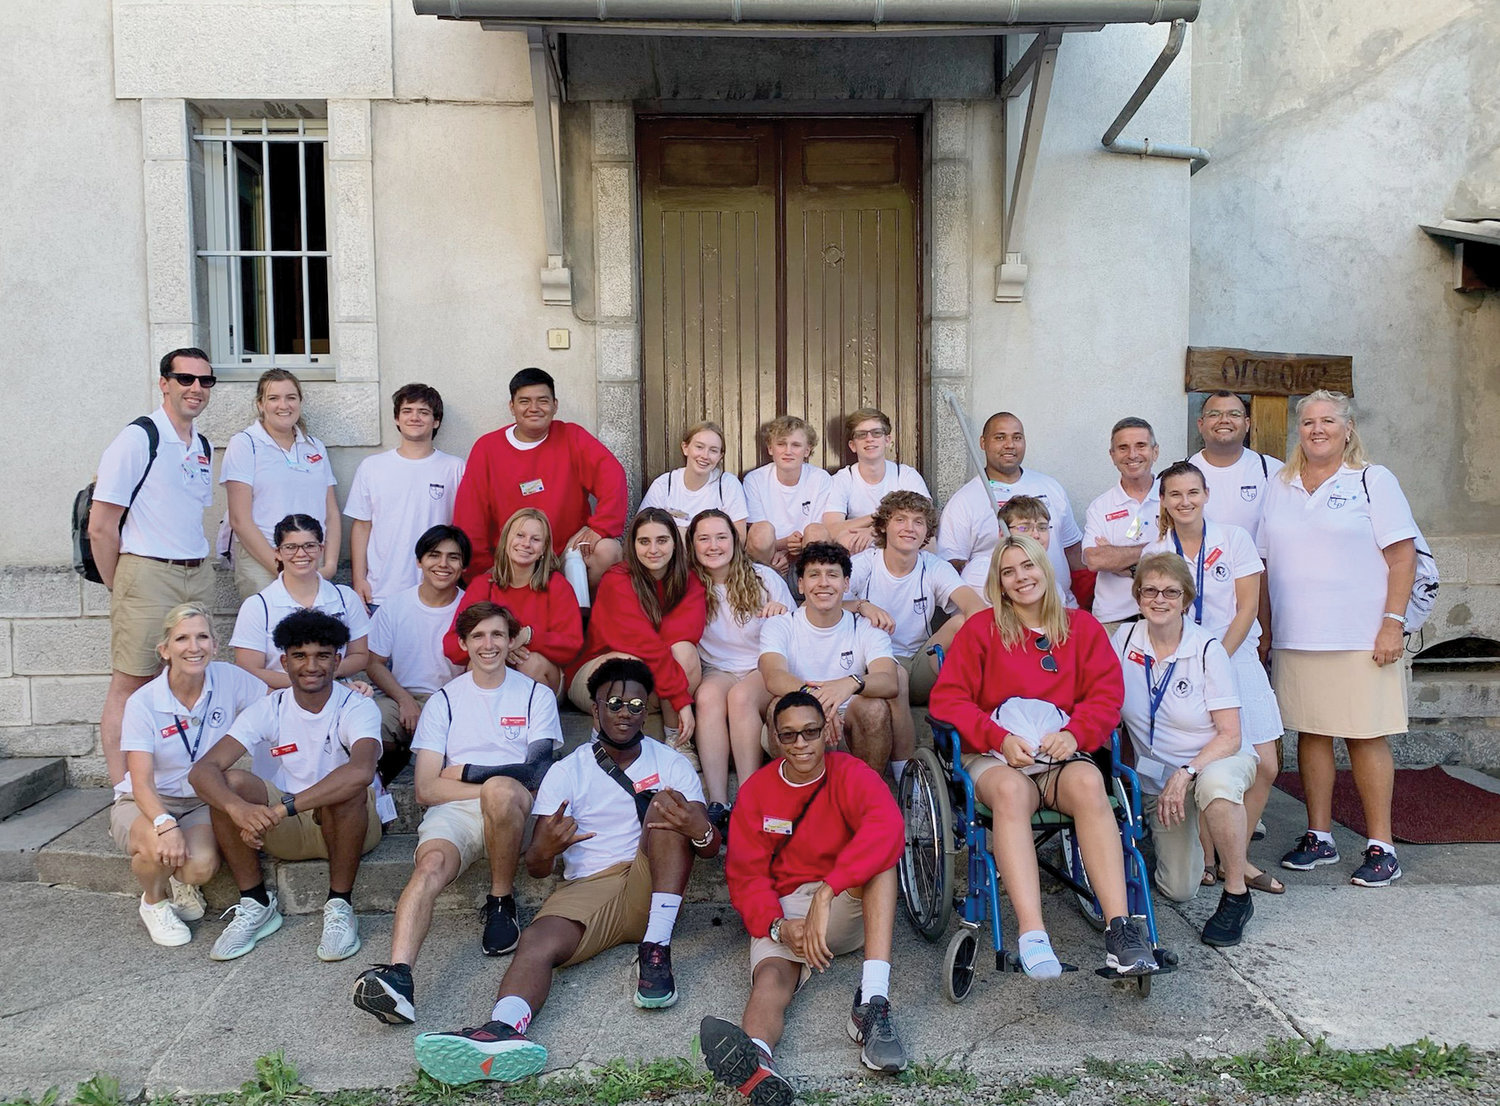 PILGRIMS IN LOURDES—In this group photo during the pilgrimage in Lourdes, France, Brother Bill Sherlog, C.F.C., stands third from right in the back row. In the front row, Hayes student Lucas Koon-Perez is seated second from left, and Hayes student Tylar Moore is fourth from left. The seven-day pilgrimage in late July was organized by Our Lady’s Pilgrimage, a nonprofit organization based in New Canaan, Conn.